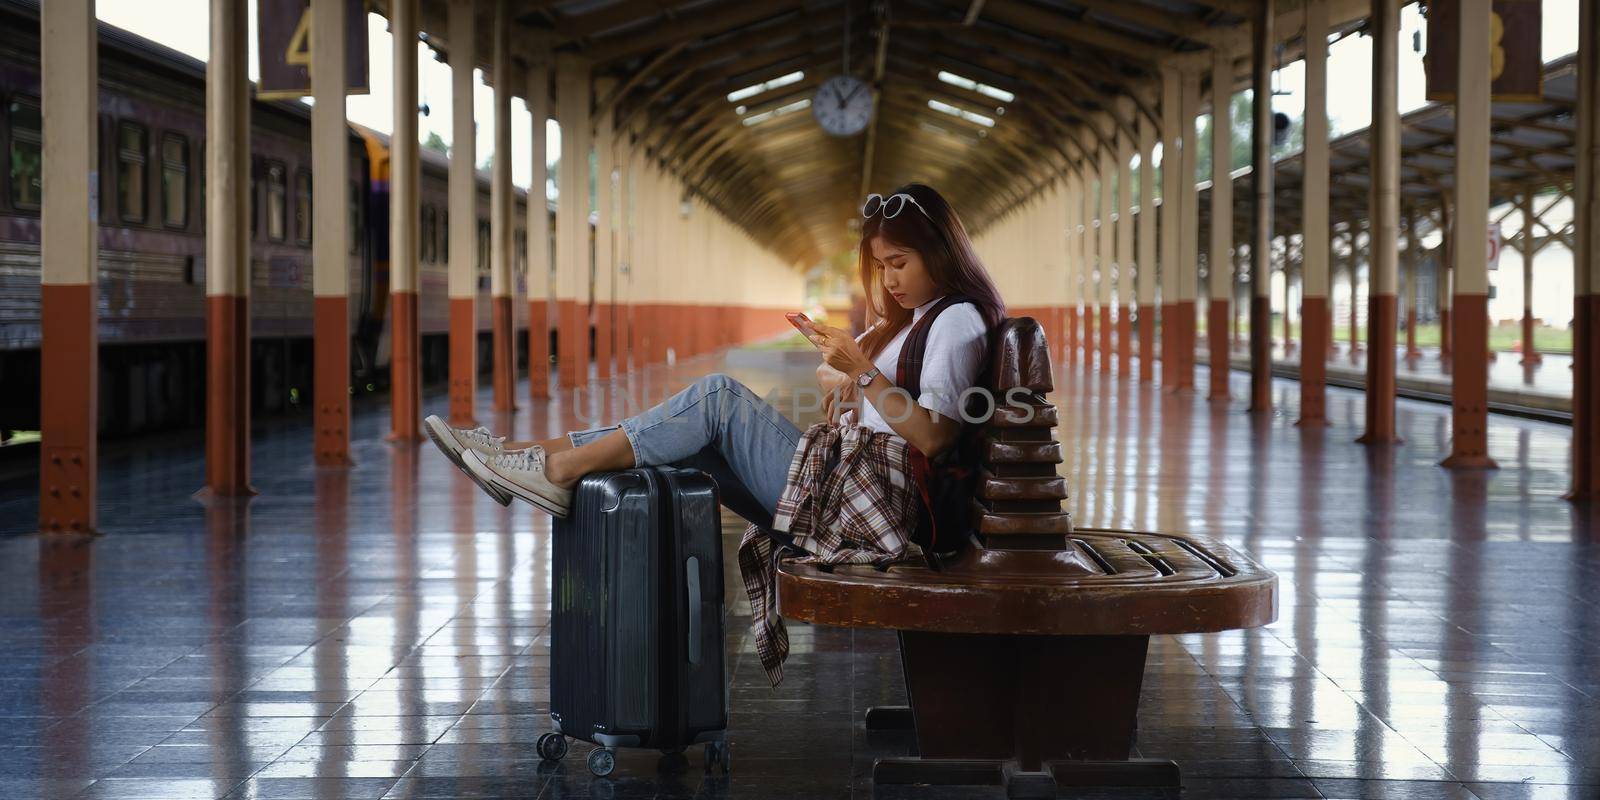 Alone traveler tourist using smartphone with luggage at train station. work and travel lifestyle concept. soft focus.